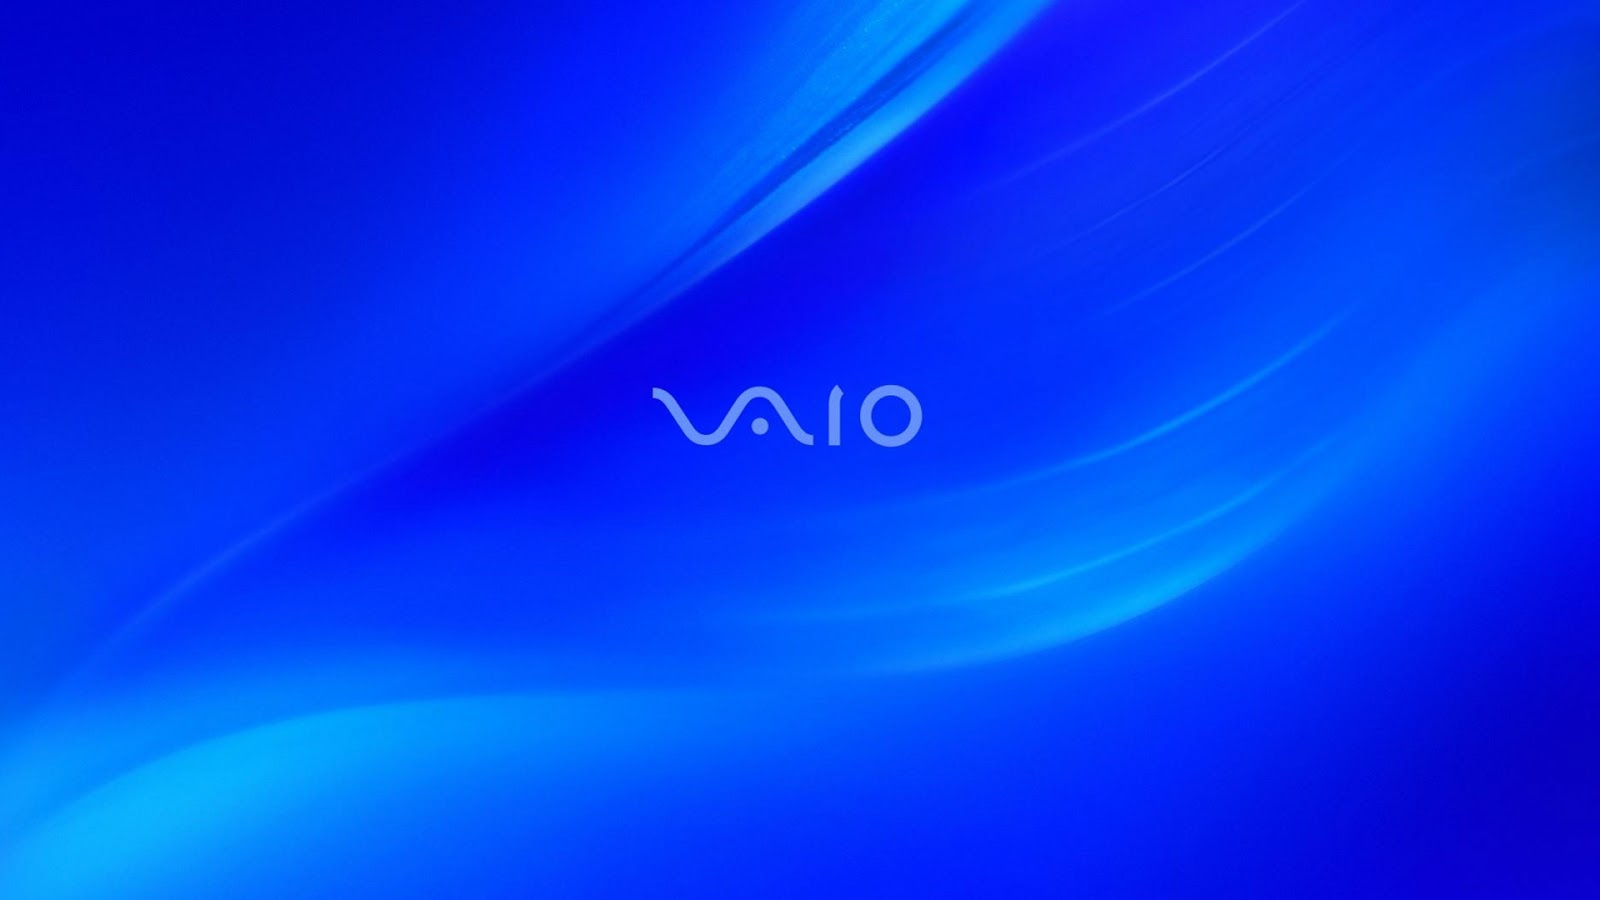  Sony  Vaio  HD  wallpapers  HD  Wallpapers  High Definition  